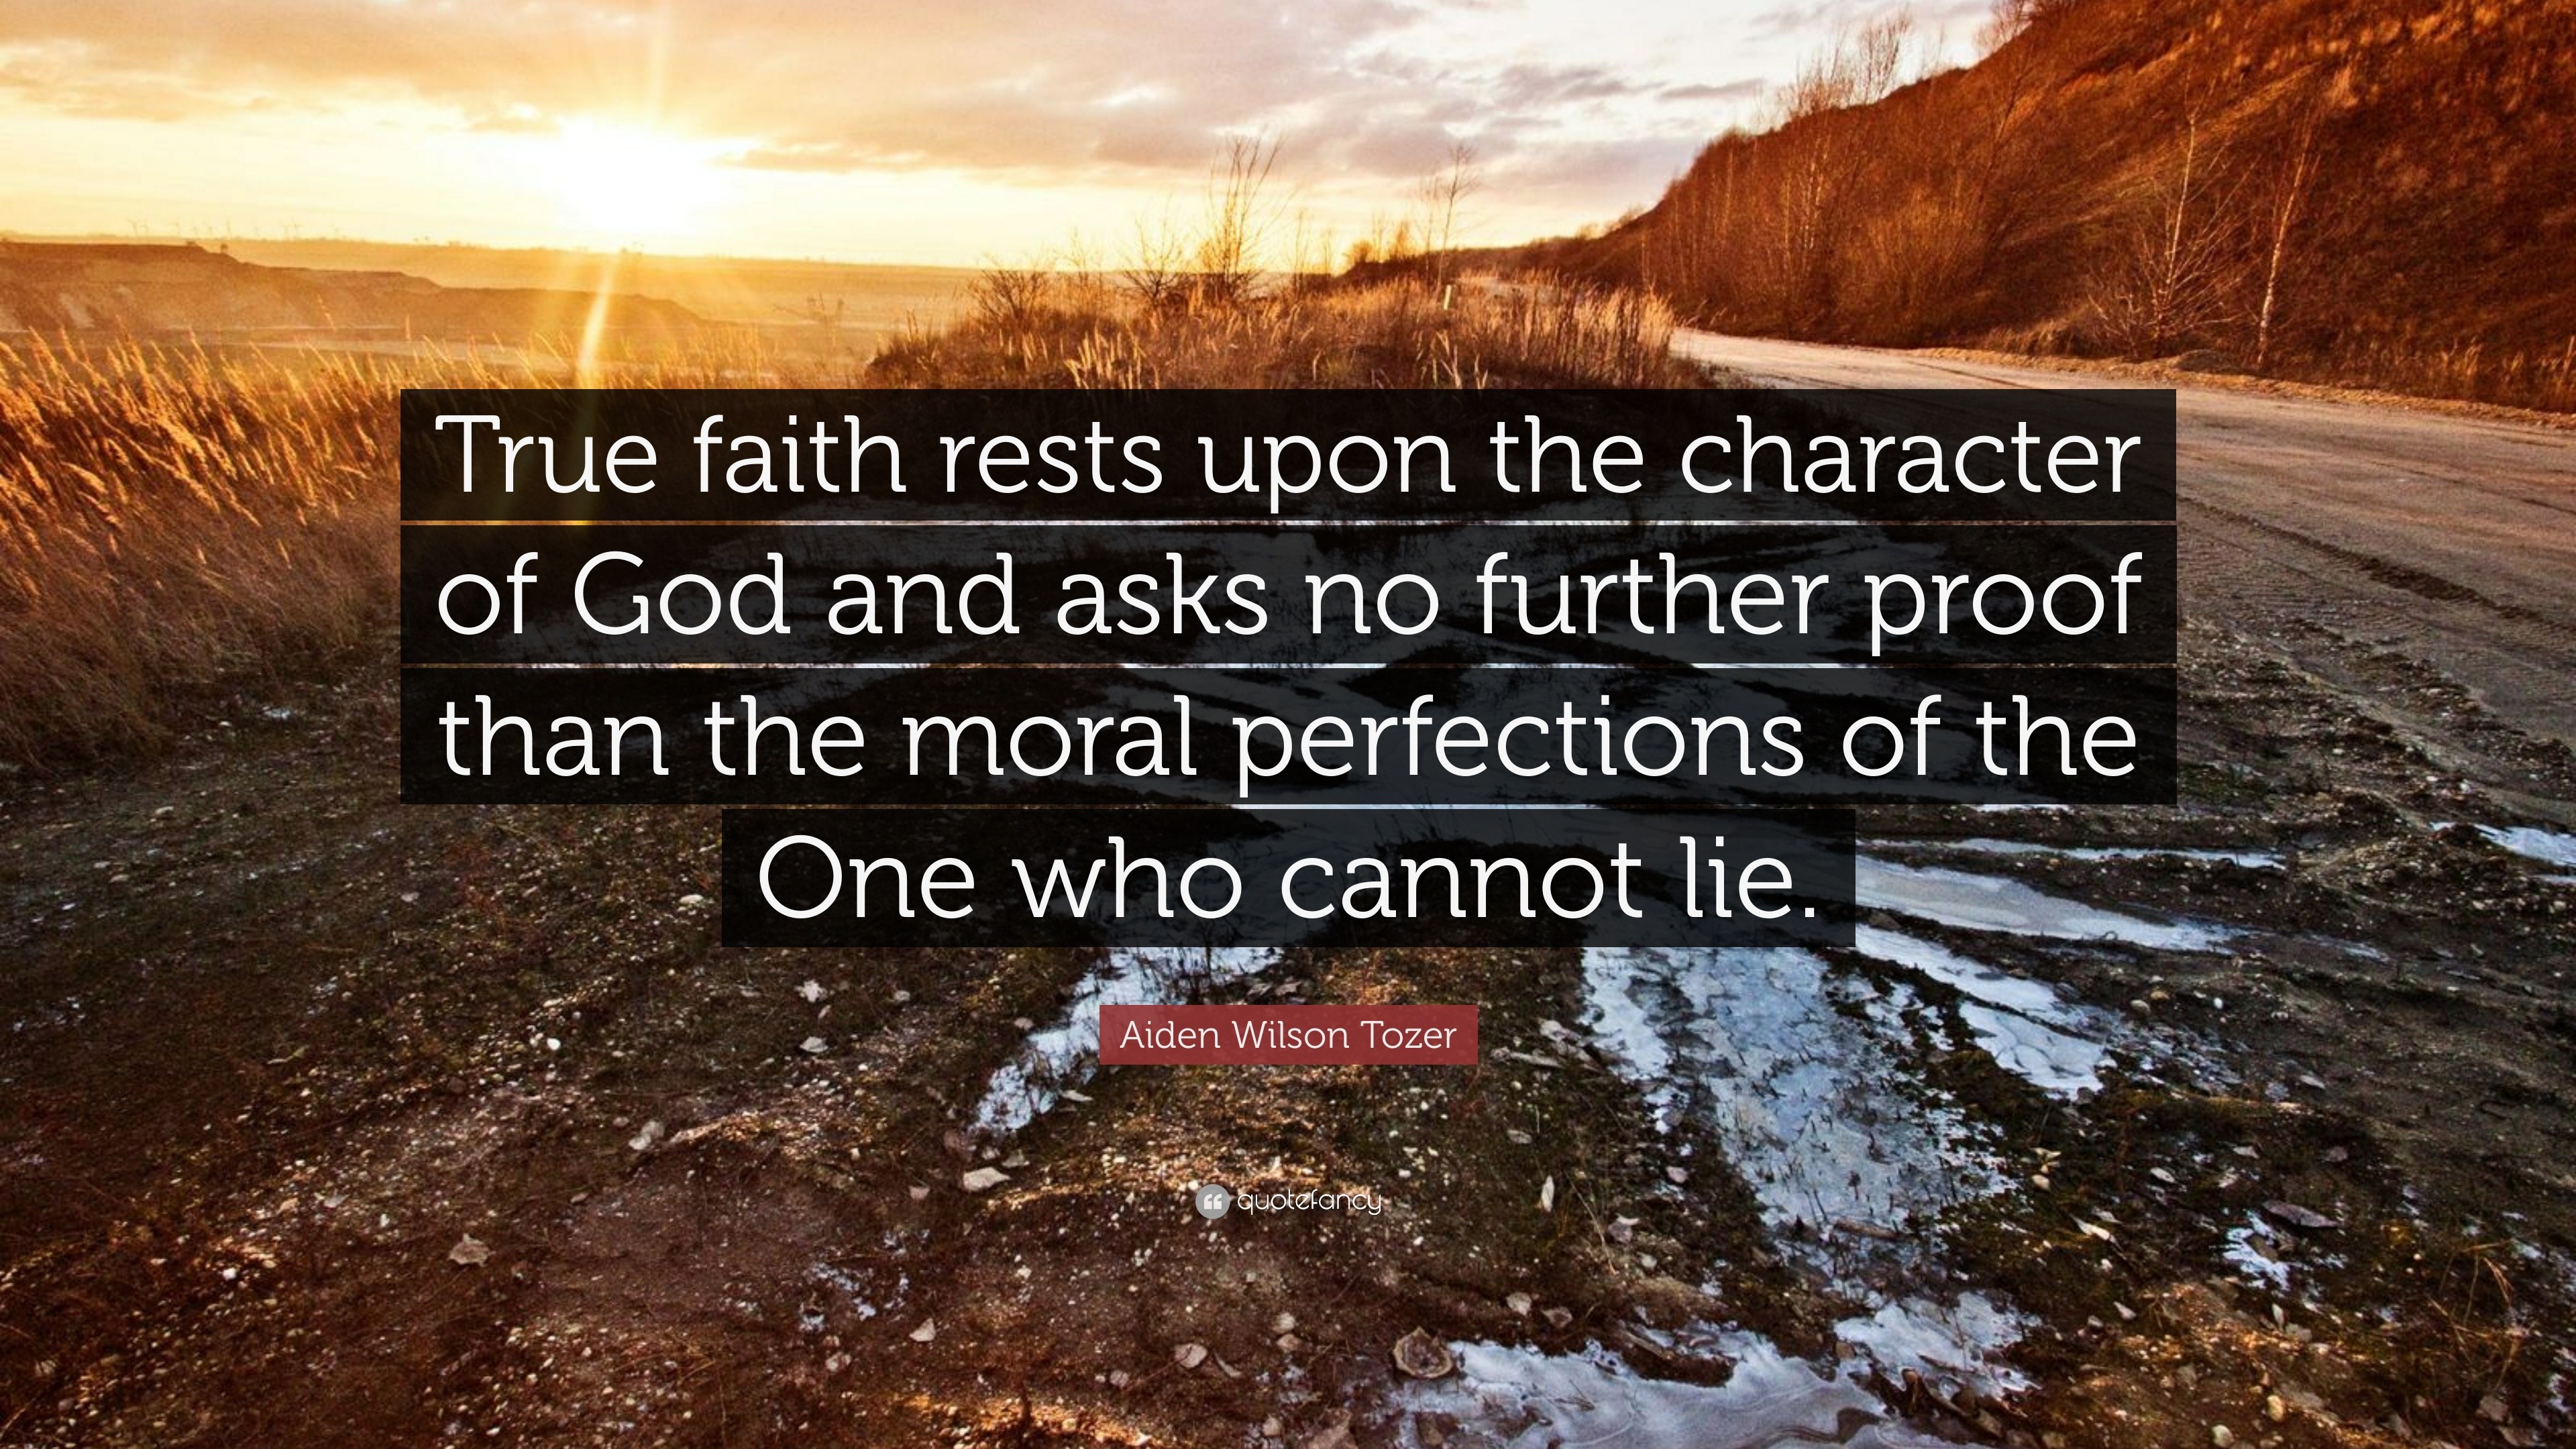 Aiden Wilson Tozer Quote: “True faith rests upon the character of God ...